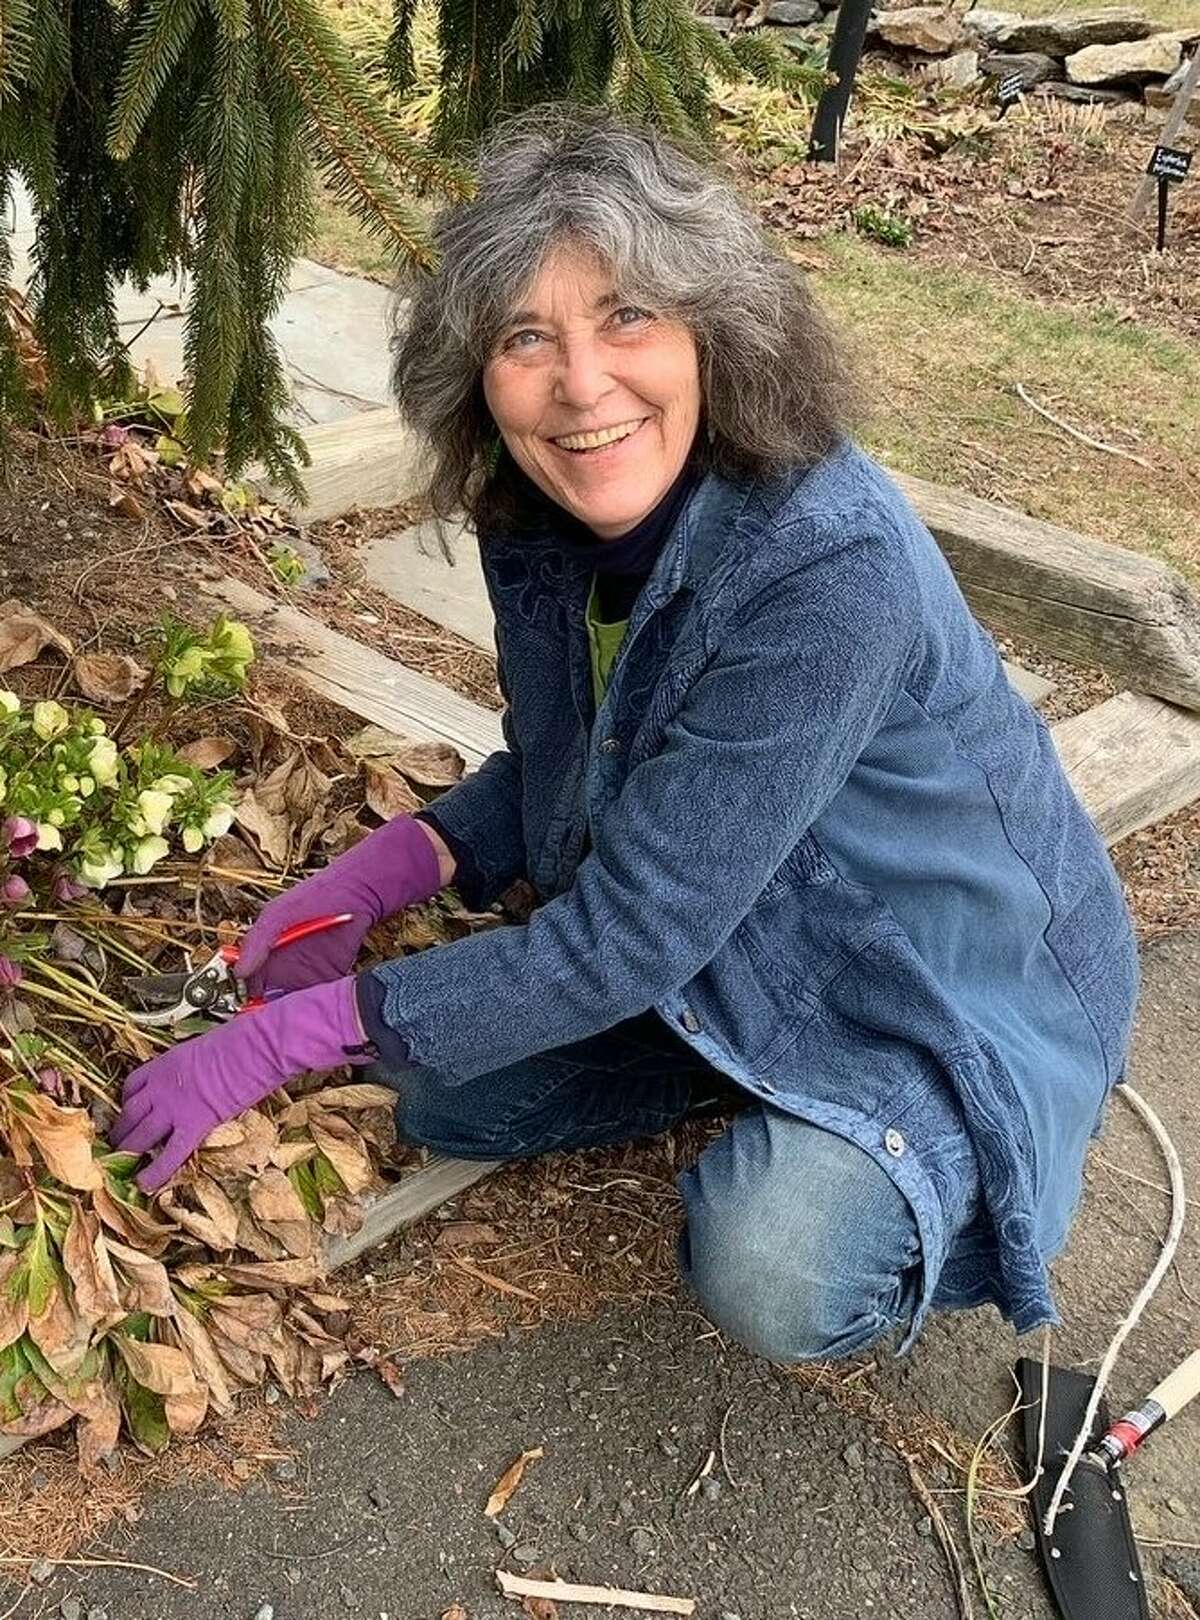 Speakers Nancy Dubrule-Clemente, pictured; Paul Nardozzi and Paul Split are appearing at the CT Flower & Garden Show, set for Feb. 23-26 at the Connecticut Convention Center in Hartford. 